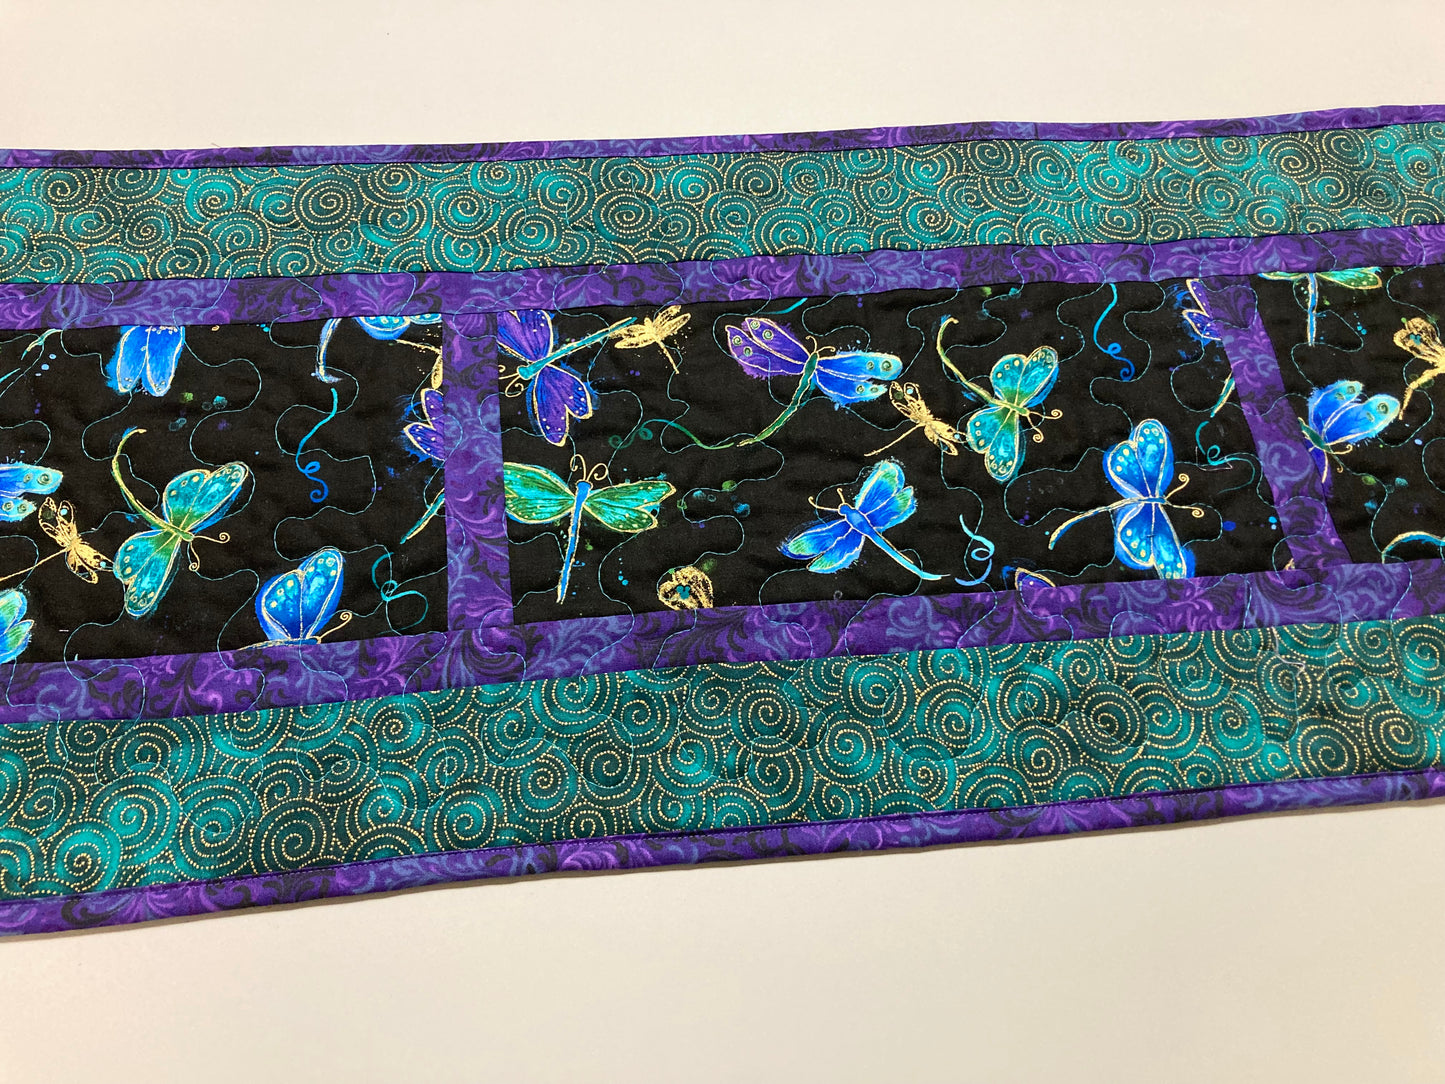 Dragonfly Quilted Table Runner, Purple Blue Dragonflies, 13x48" Reversible Cotton, Coffee Dining Buffet Table Spring Summer Runner Everyday